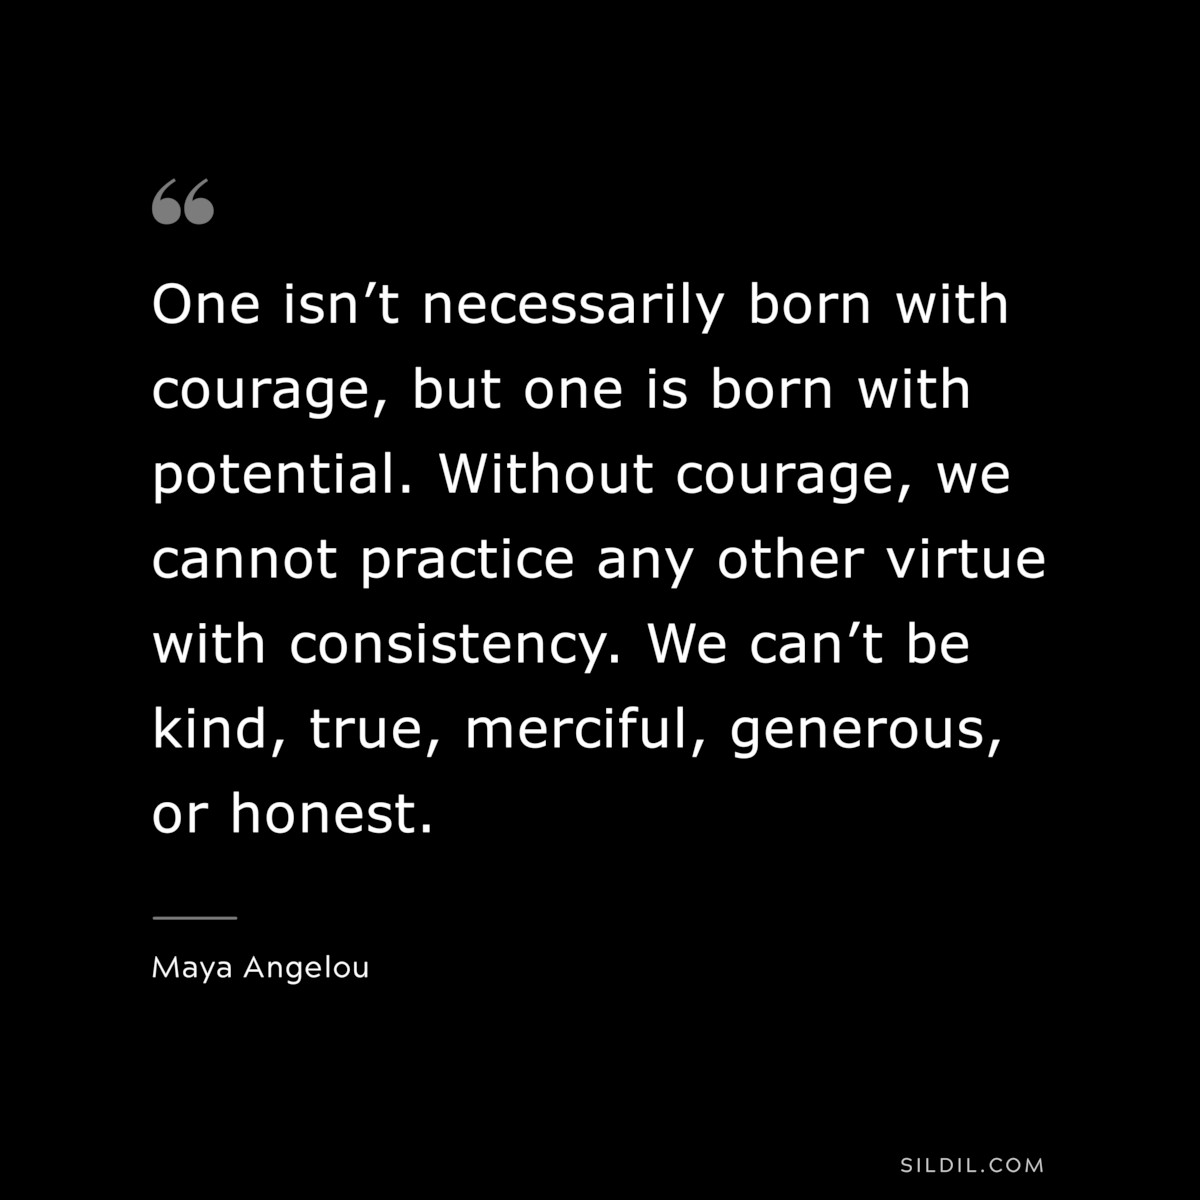 One isn’t necessarily born with courage, but one is born with potential. Without courage, we cannot practice any other virtue with consistency. We can’t be kind, true, merciful, generous, or honest. ― Maya Angelou